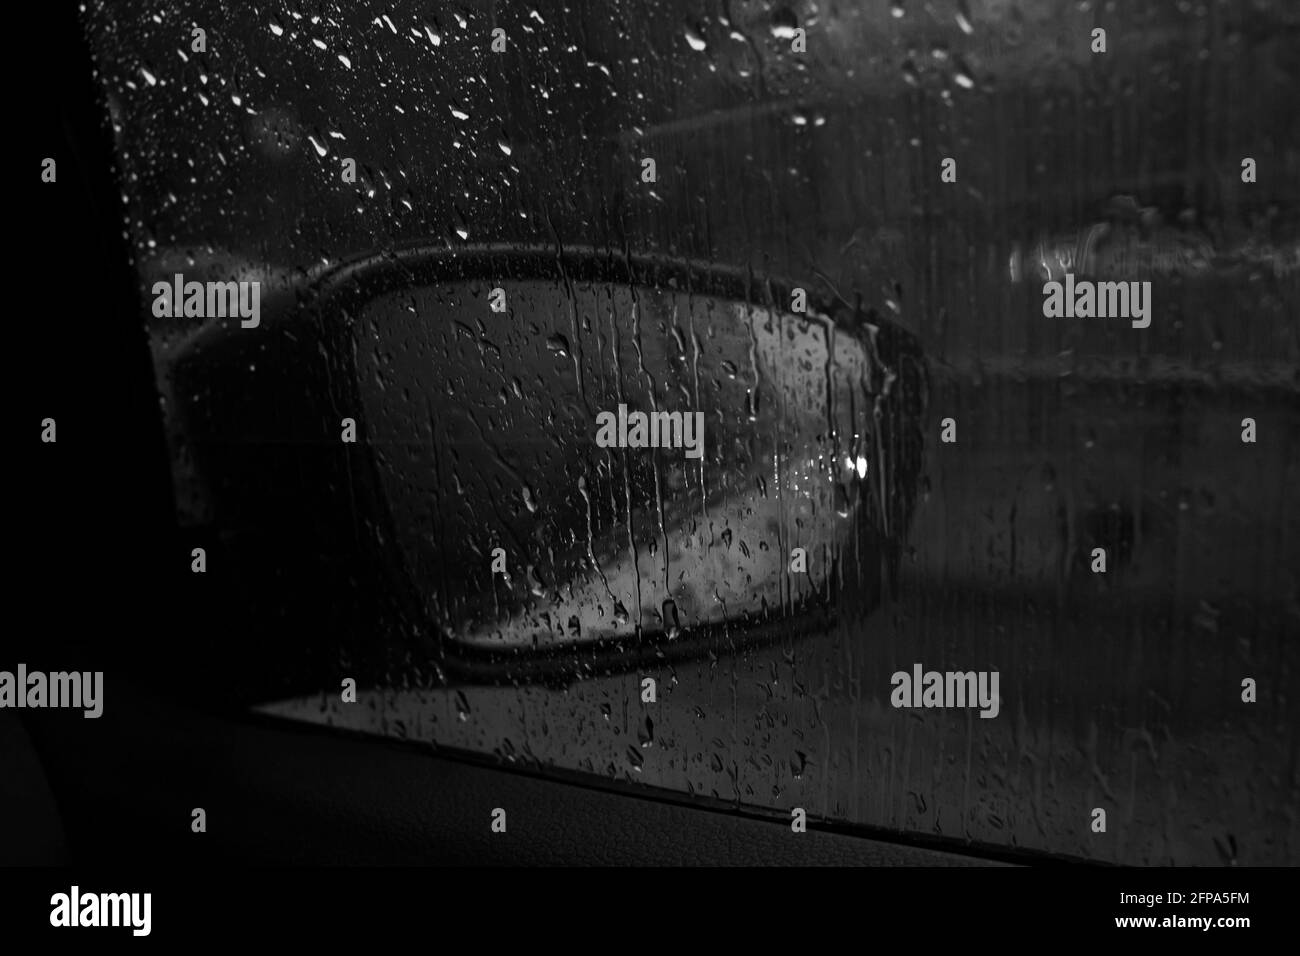 Car side mirror with headlight reflection in rain Stock Photo